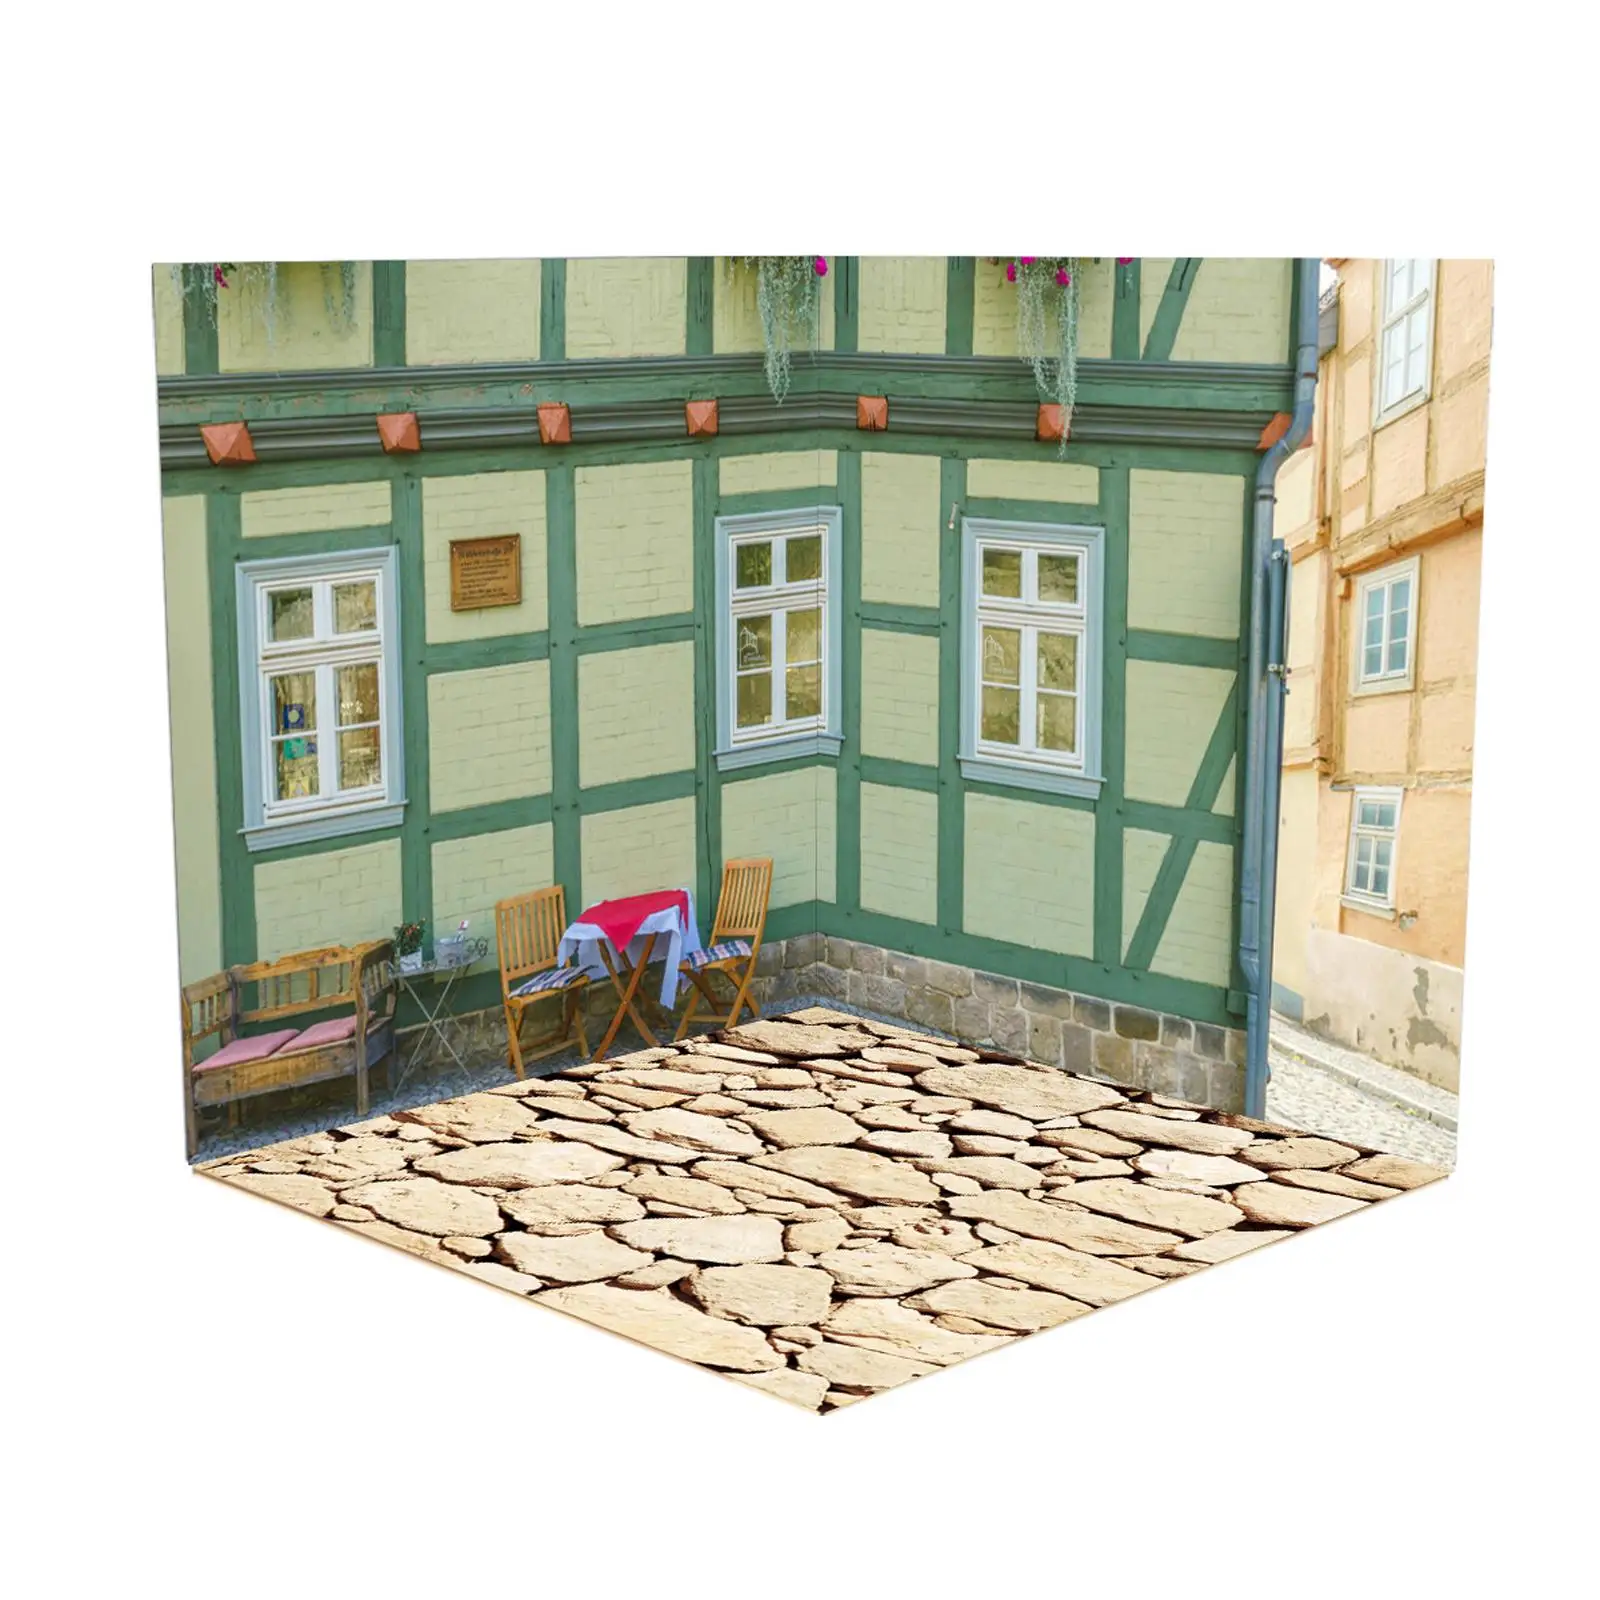 1/12 Scale Backdrop Scene Display Background Layout for Action Figures Dolls